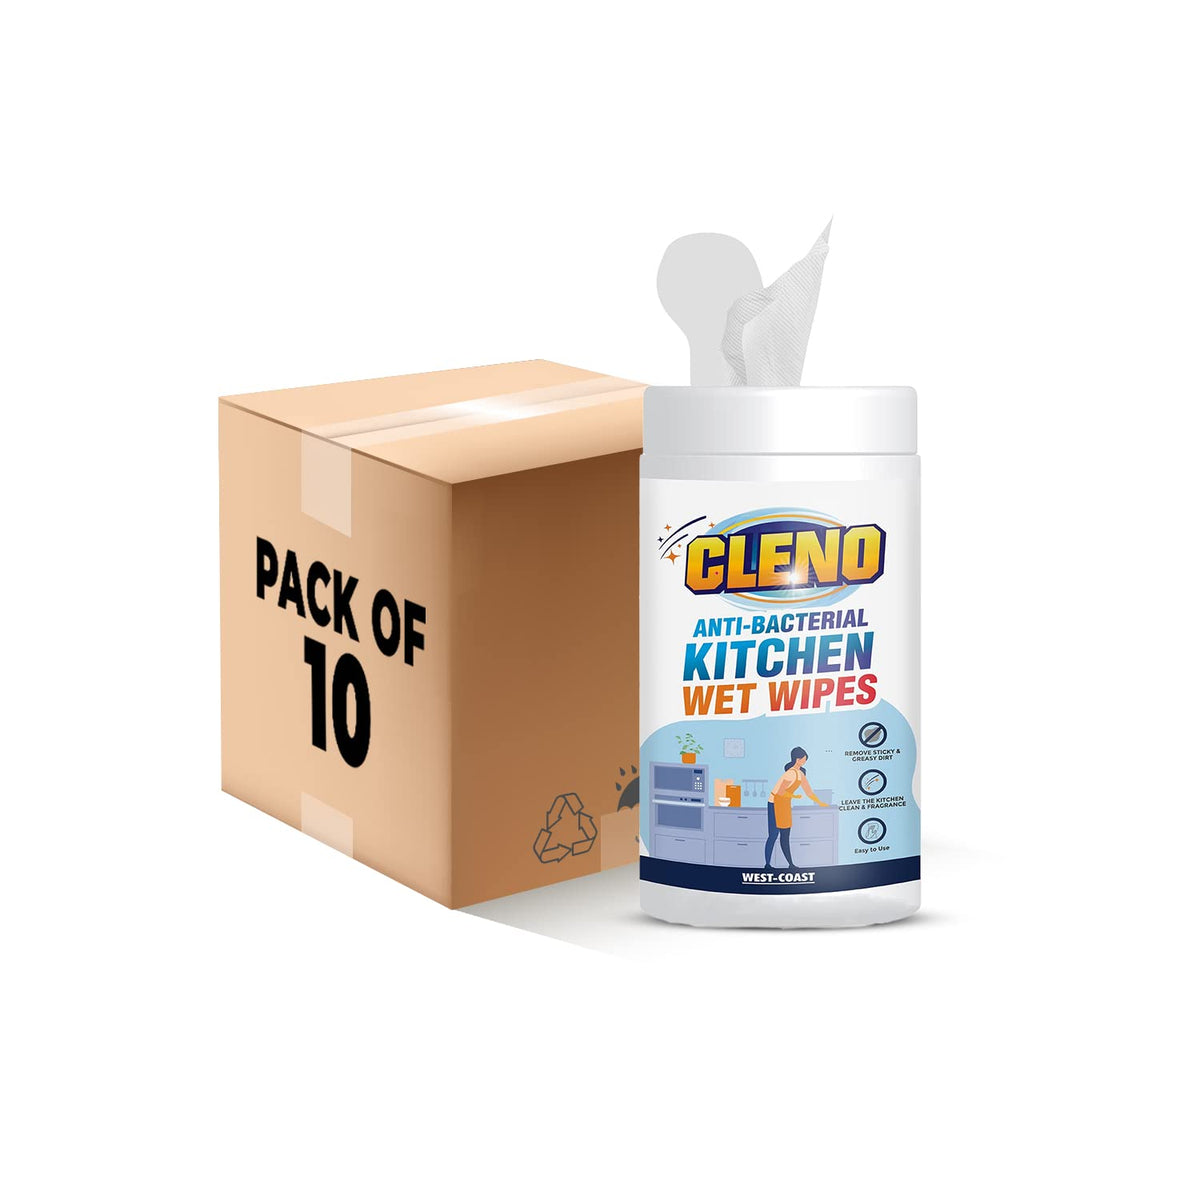 Cleno Kitchen Wet Wipes to Clean Sticky, Greasy Dirt on Platform, Shelves, Jars, Floor & Sink - 50 Wipes (Ready to Use) (Pack of 10)